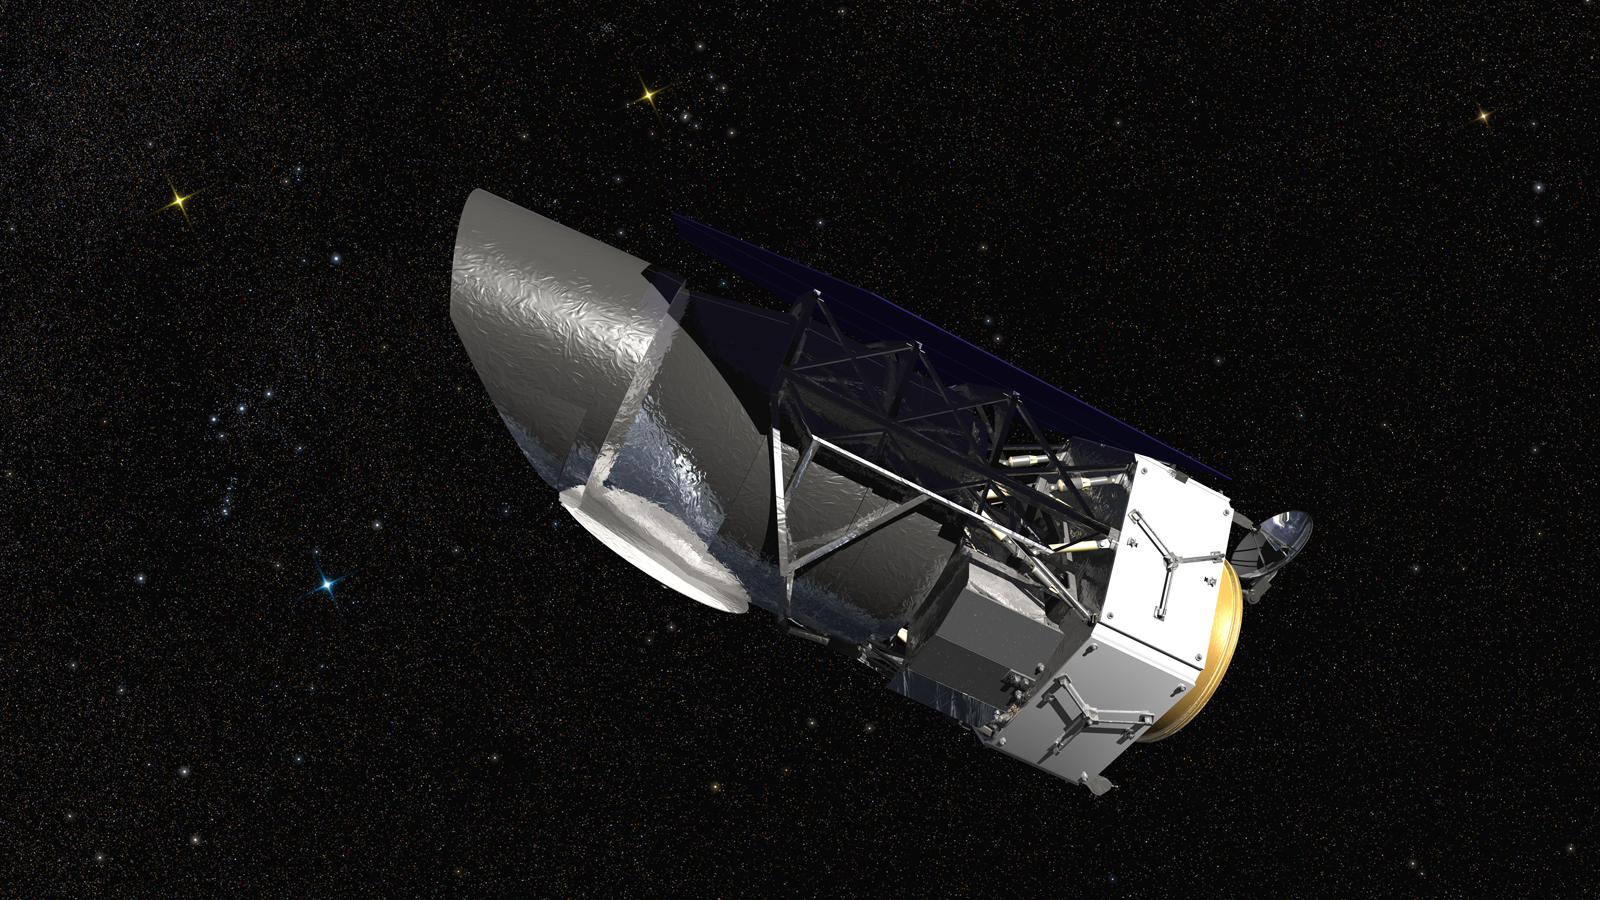 An artist's concept of the Wide Field Infrared Survey Telescope (WFIRST). NASA has officially chosen the infrared-space telescope as the scientific successor to the James Webb Space Telescope, with a projected launch date around the 2024 timeframe. WFIRST is expected to make significant contributions in the study of dark energy and the characterisation of thousands of extrasolar planets. Image Credit: NASA/GSFC/Conceptual Image Lab